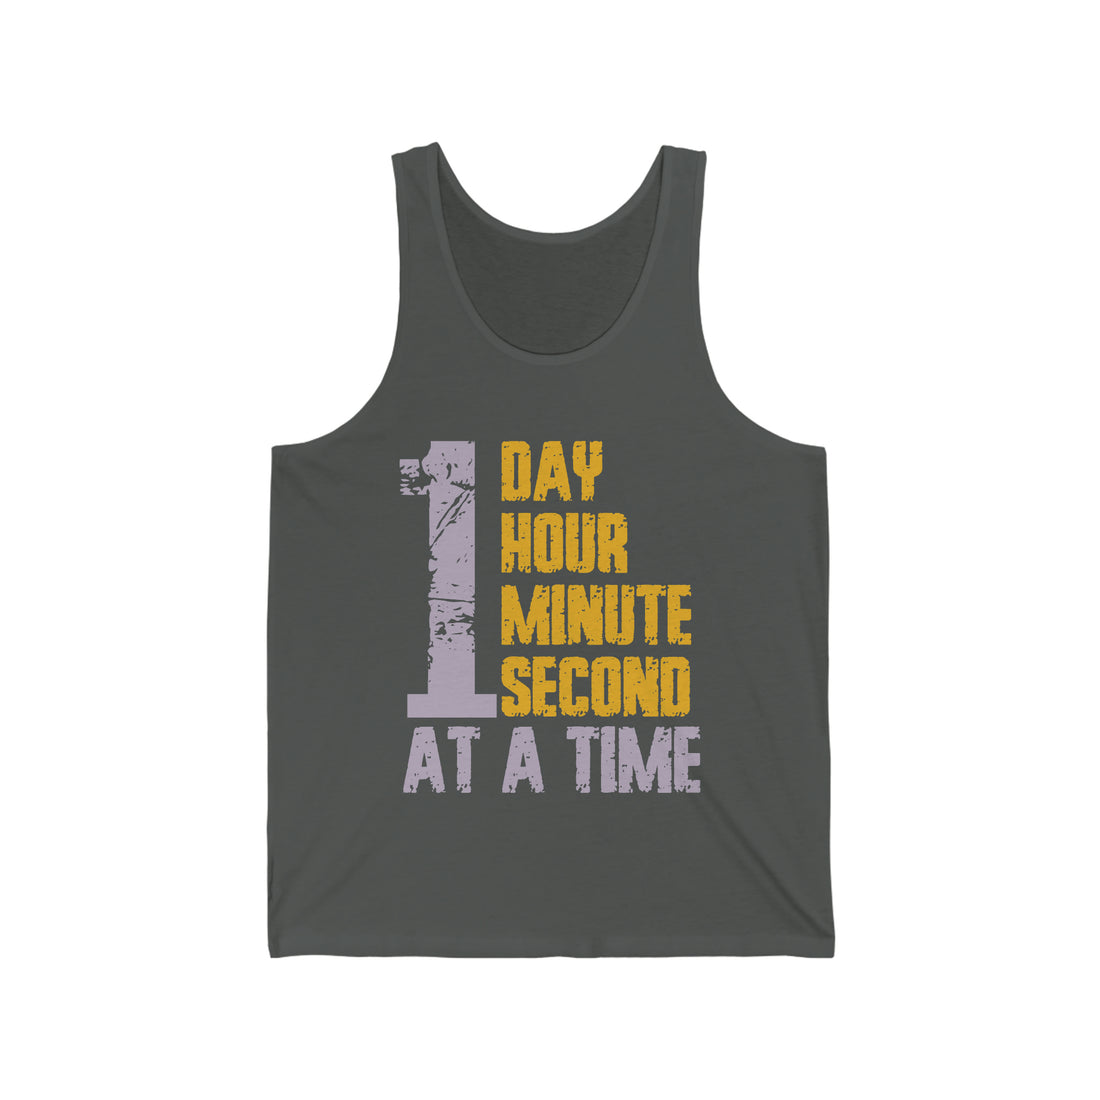 1 Day Hour Minute Second At A Time - Unisex Jersey Tank Top